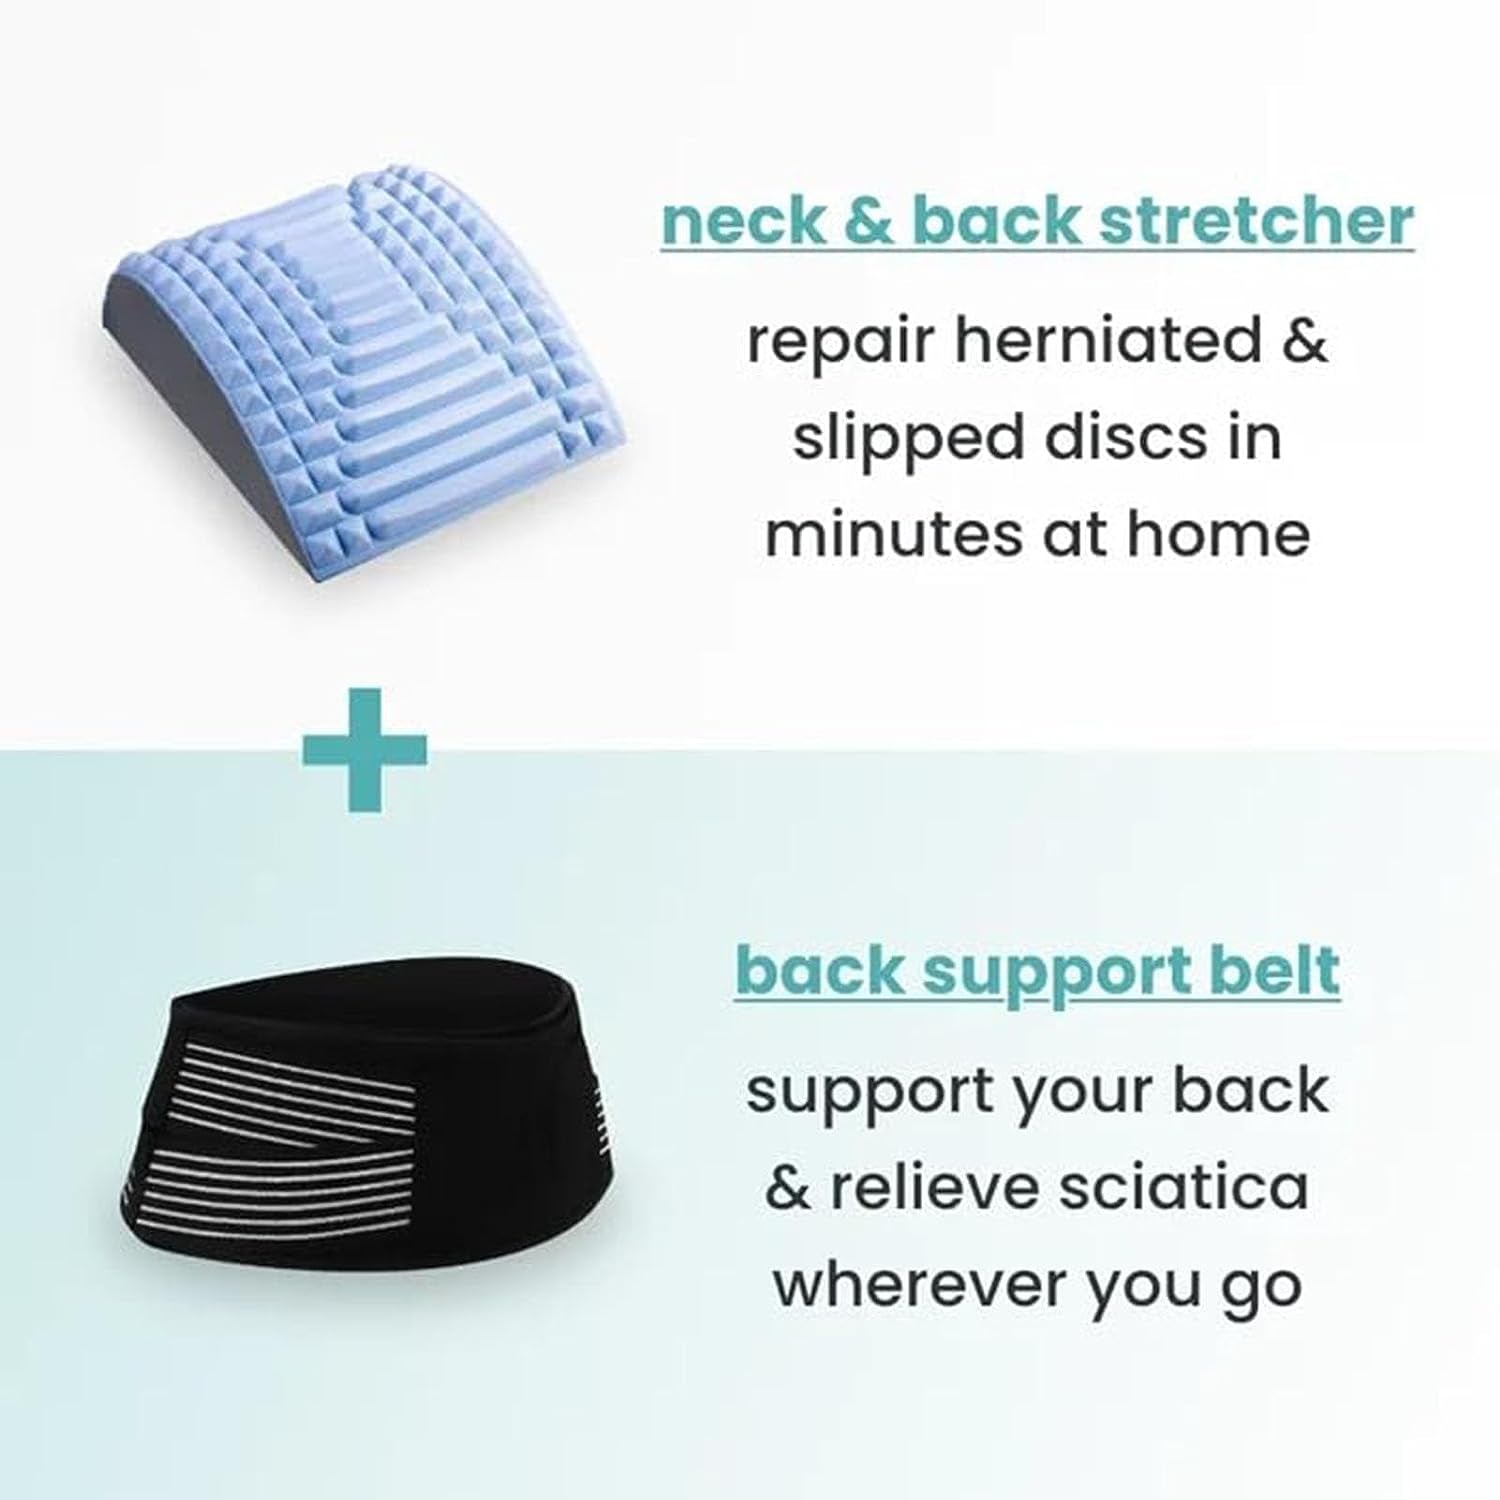 "Ultimate Back and Neck Relaxation Tool for Instant Pain Relief - Refresh and Rejuvenate with our Neck & Back Stretcher!"